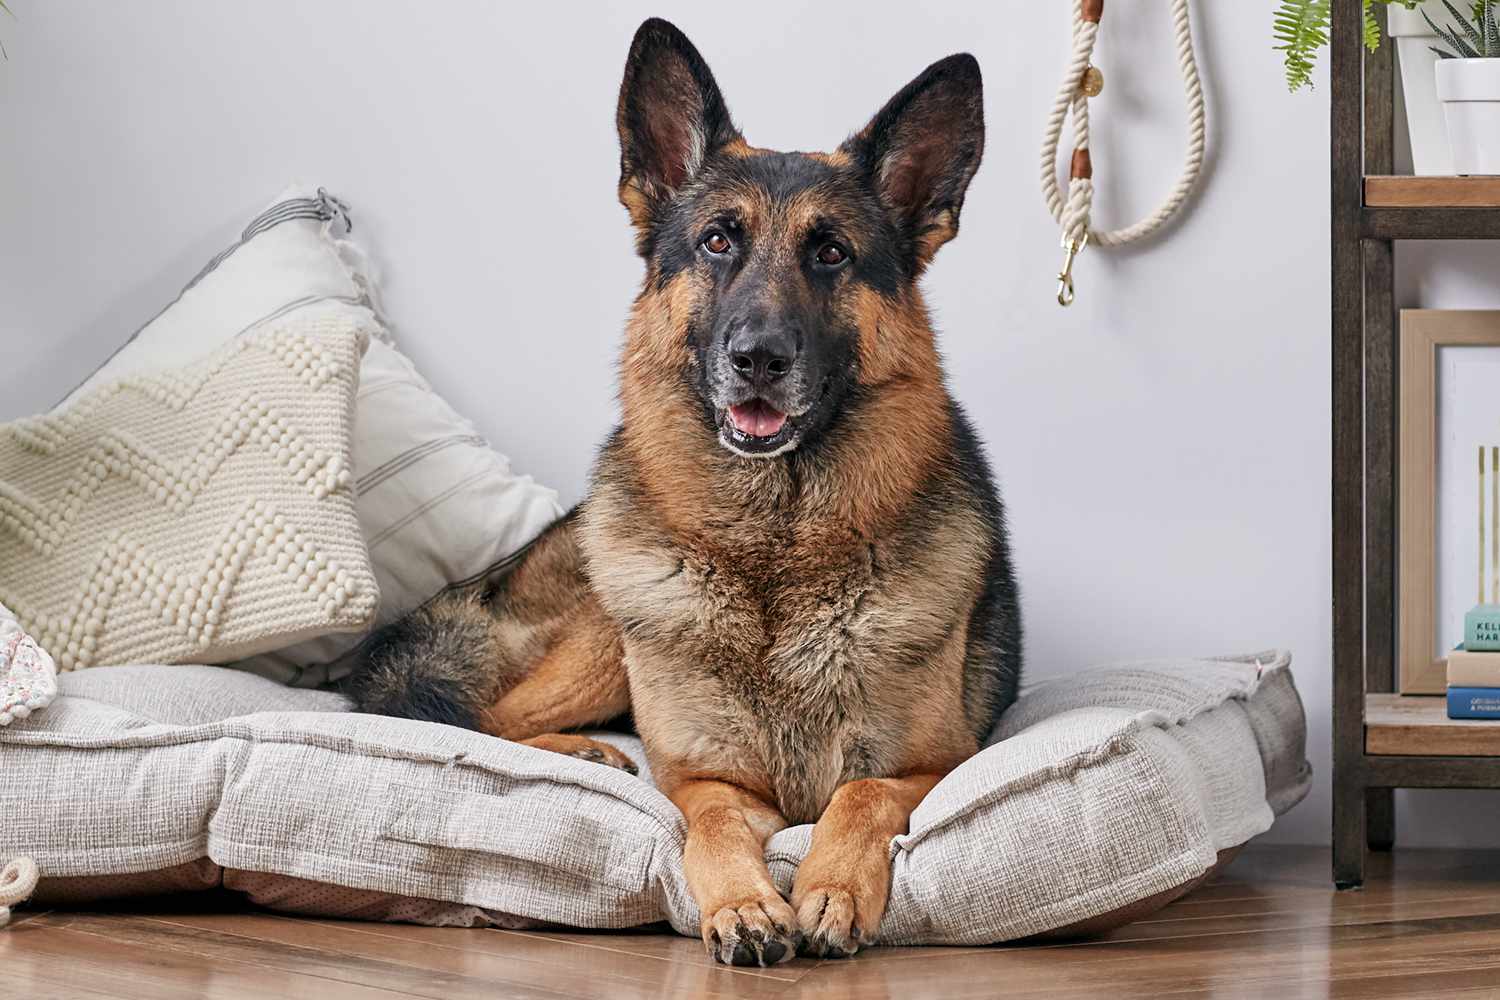 A German Shepherd on a dog bed